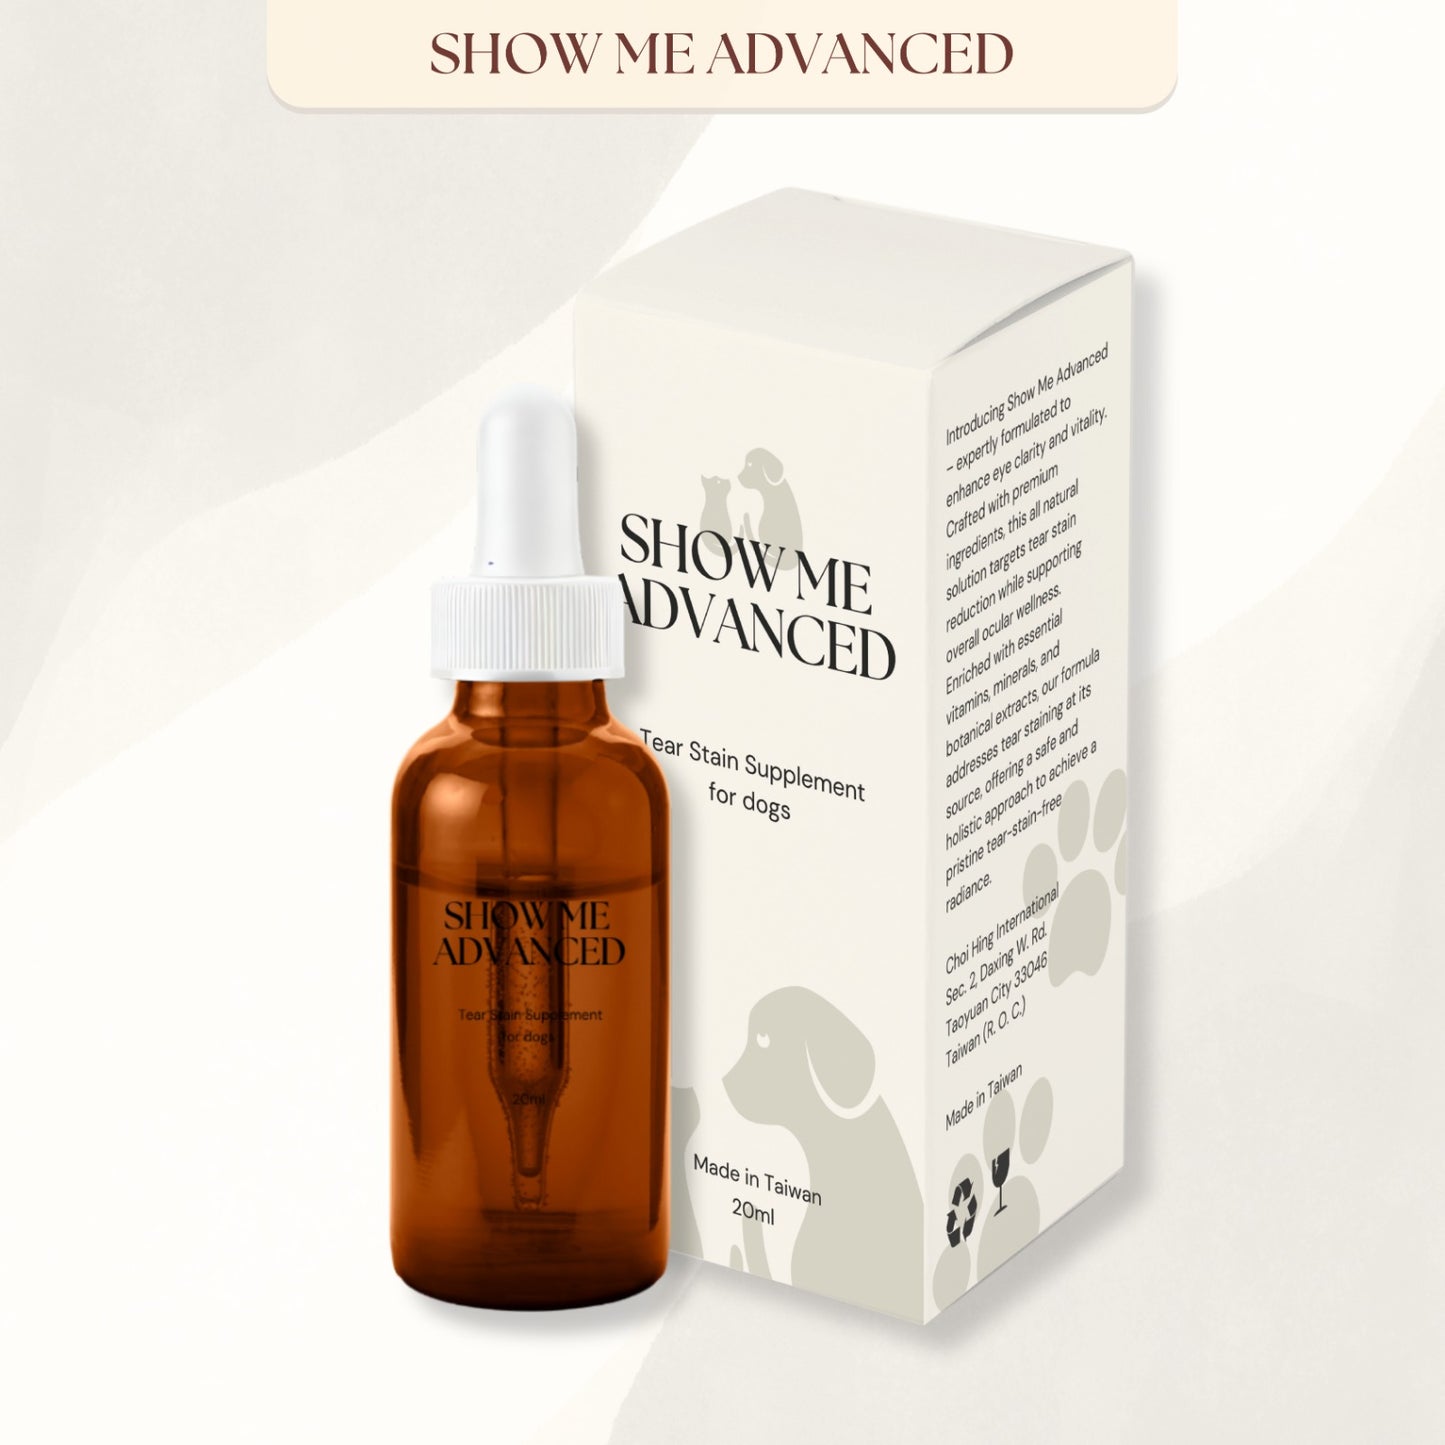 Show Me Advanced Tear Stain Supplement